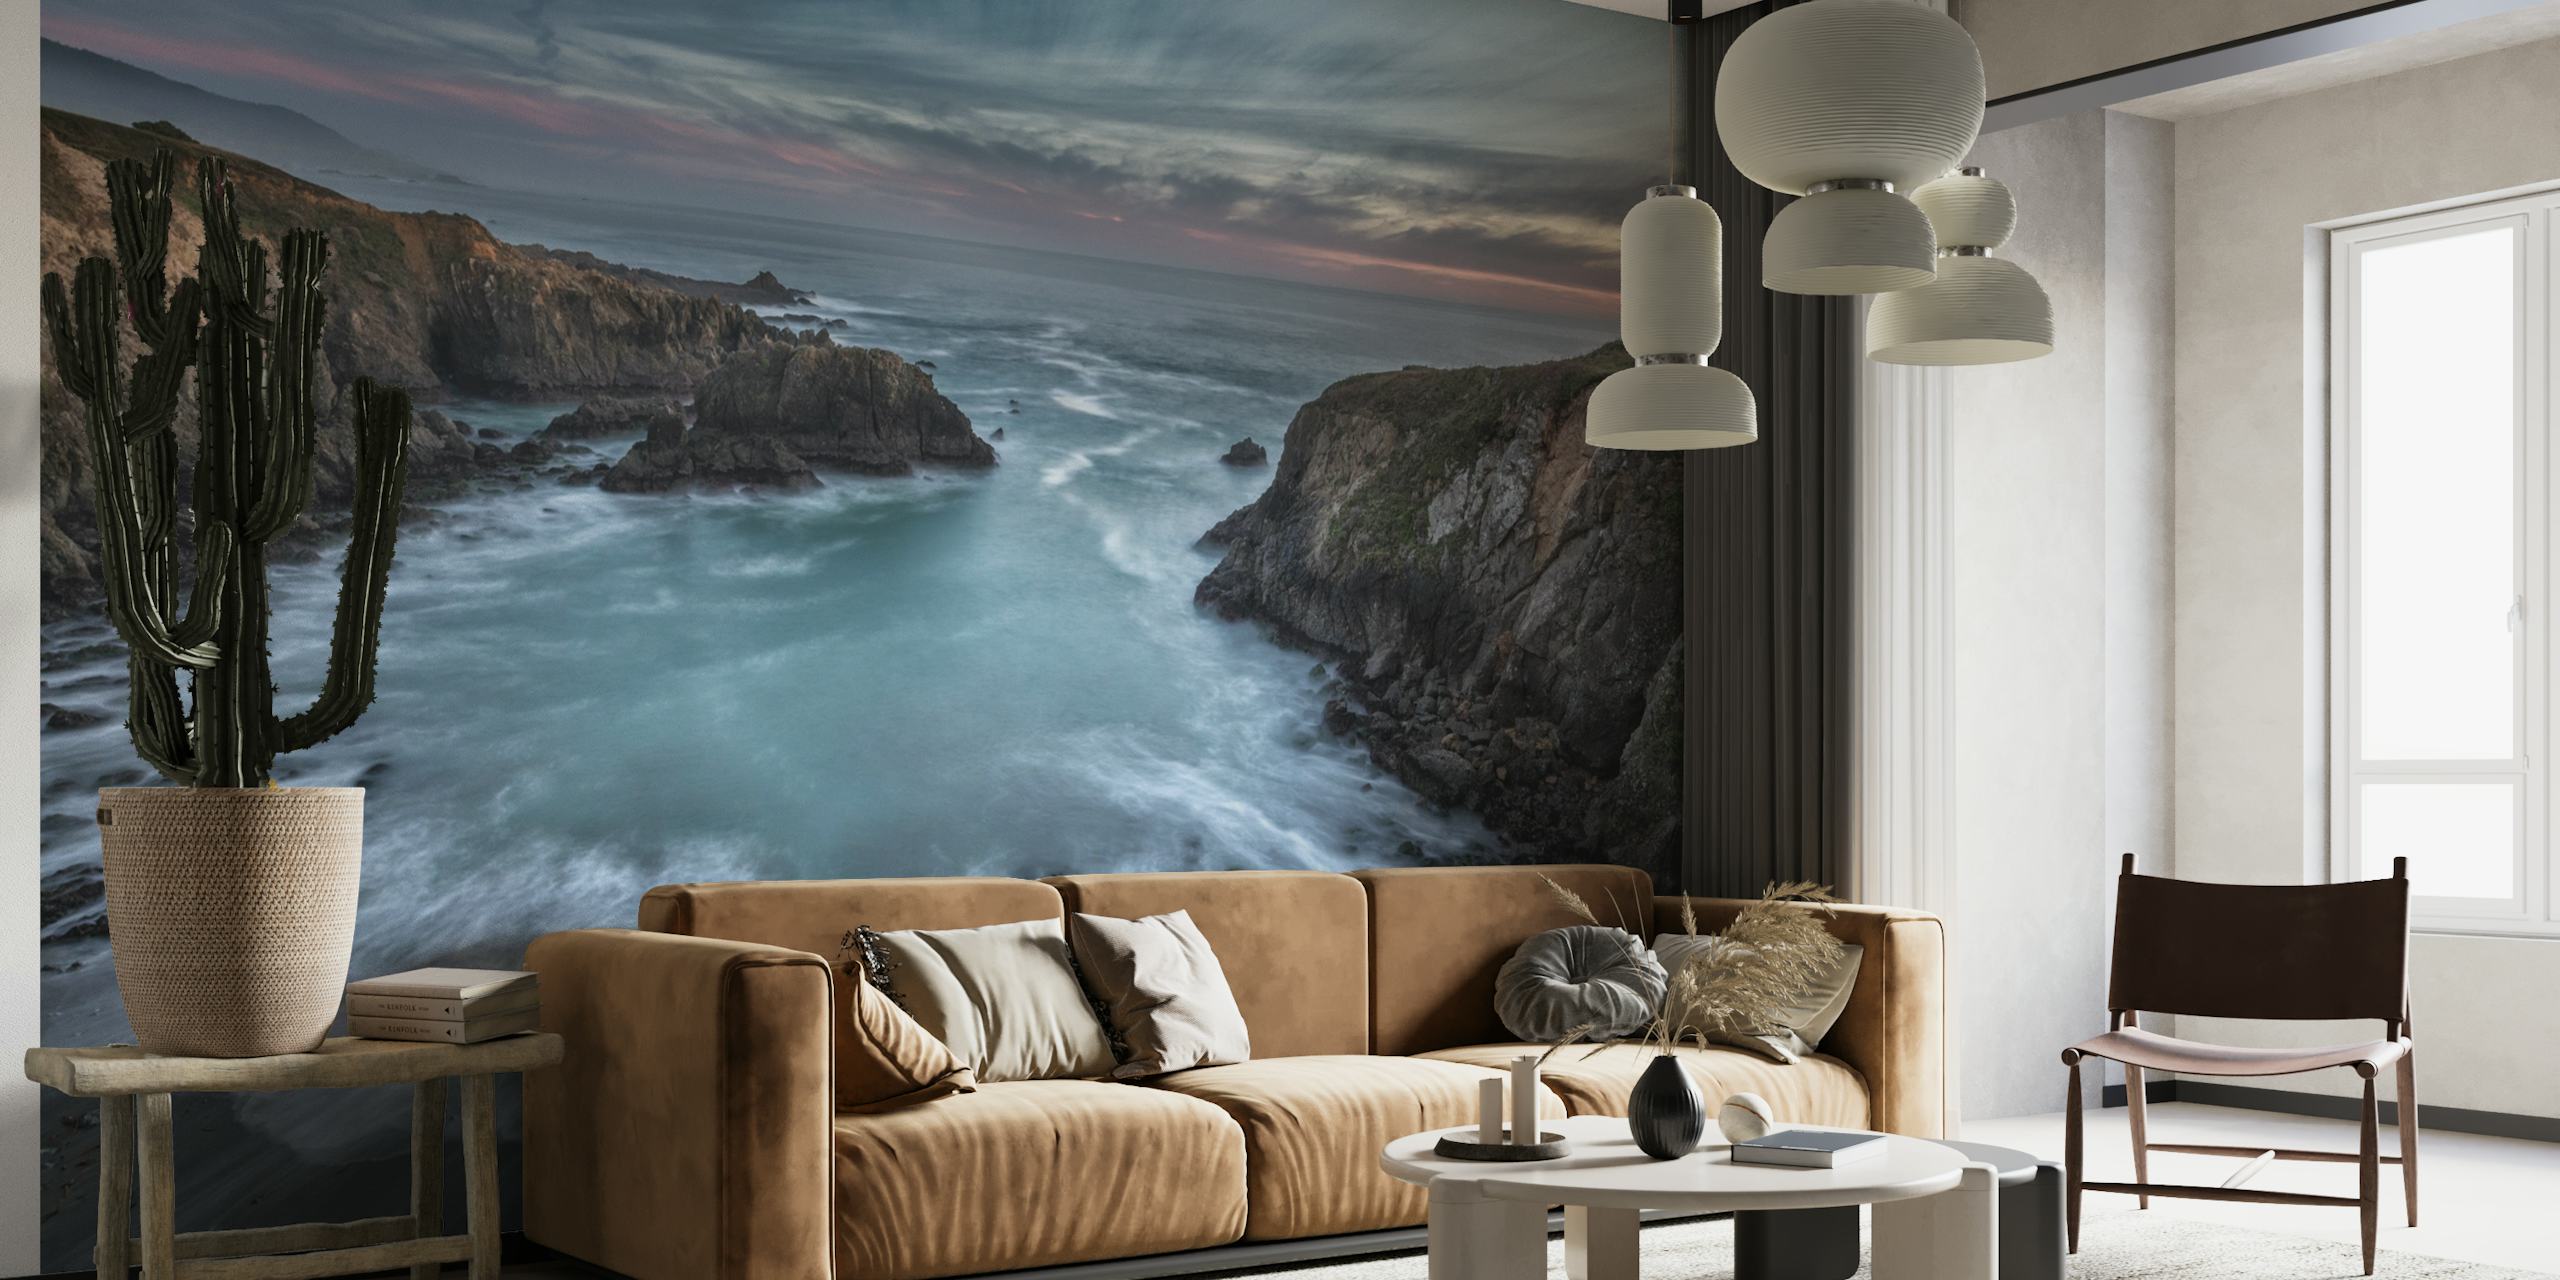 Coastal seascape wall mural with waves crashing against cliffs at dusk